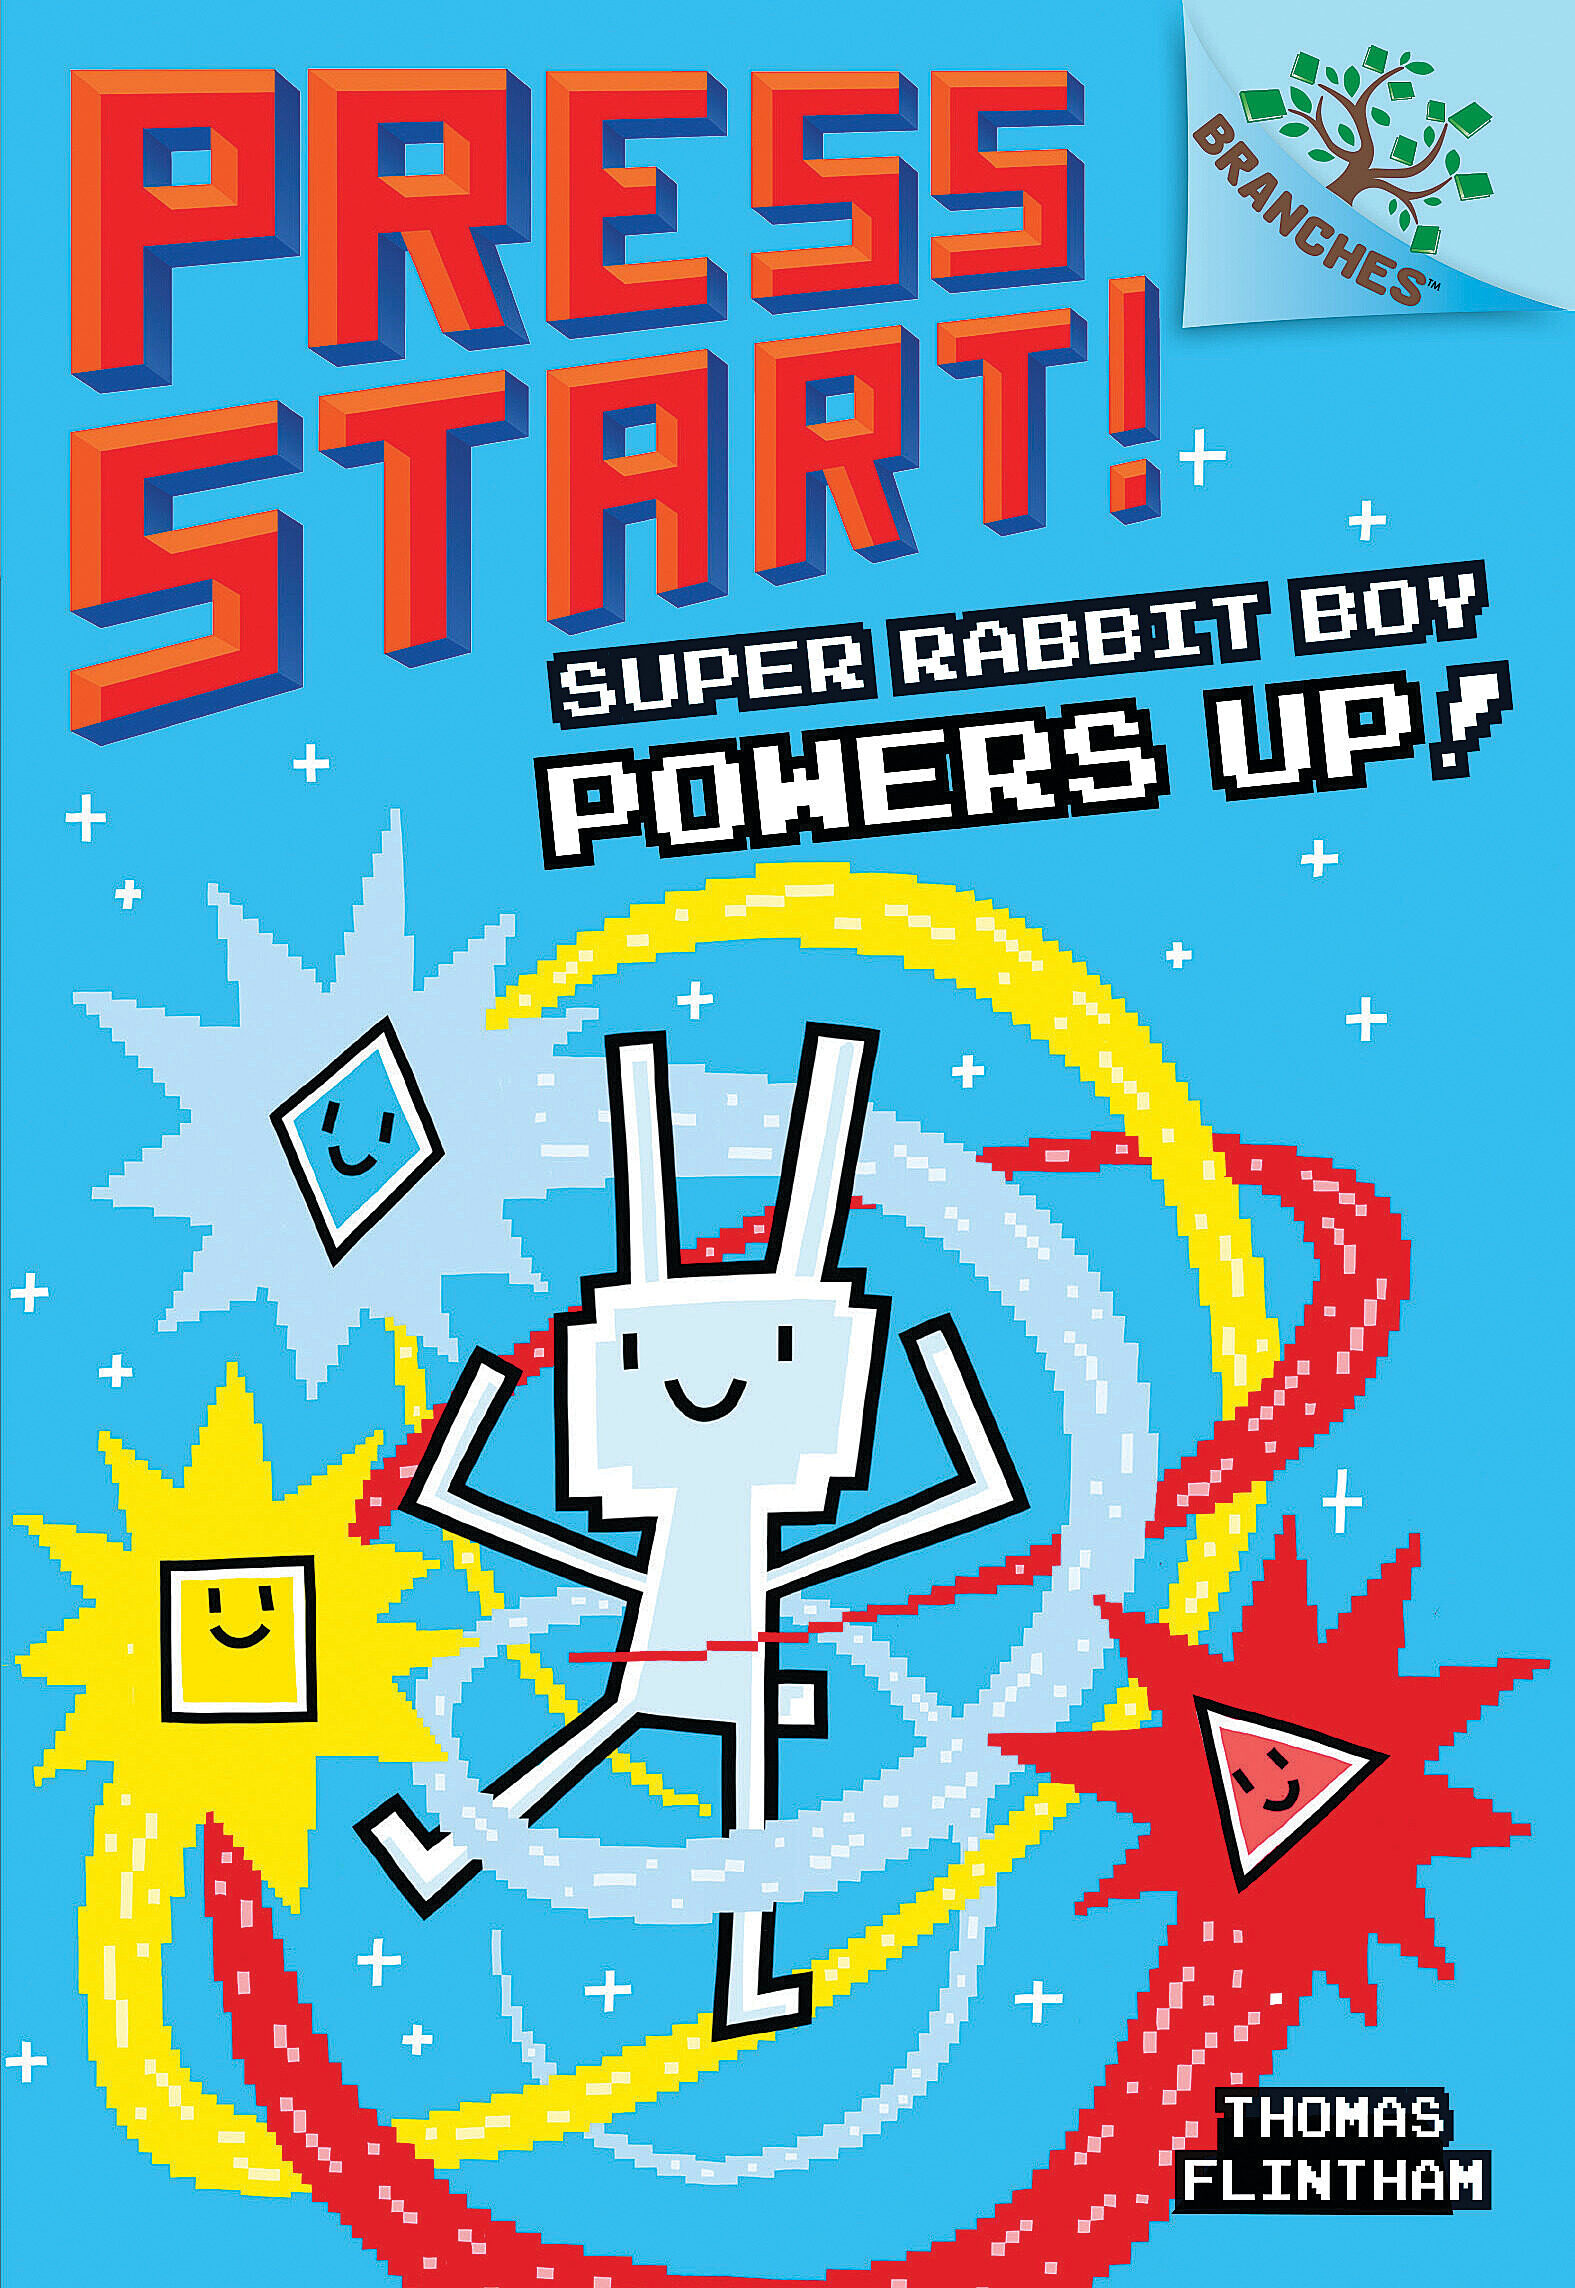 Super Rabbit Boy Powers Up! A Branches Book (Press Start! #2) A Branches Book cover image